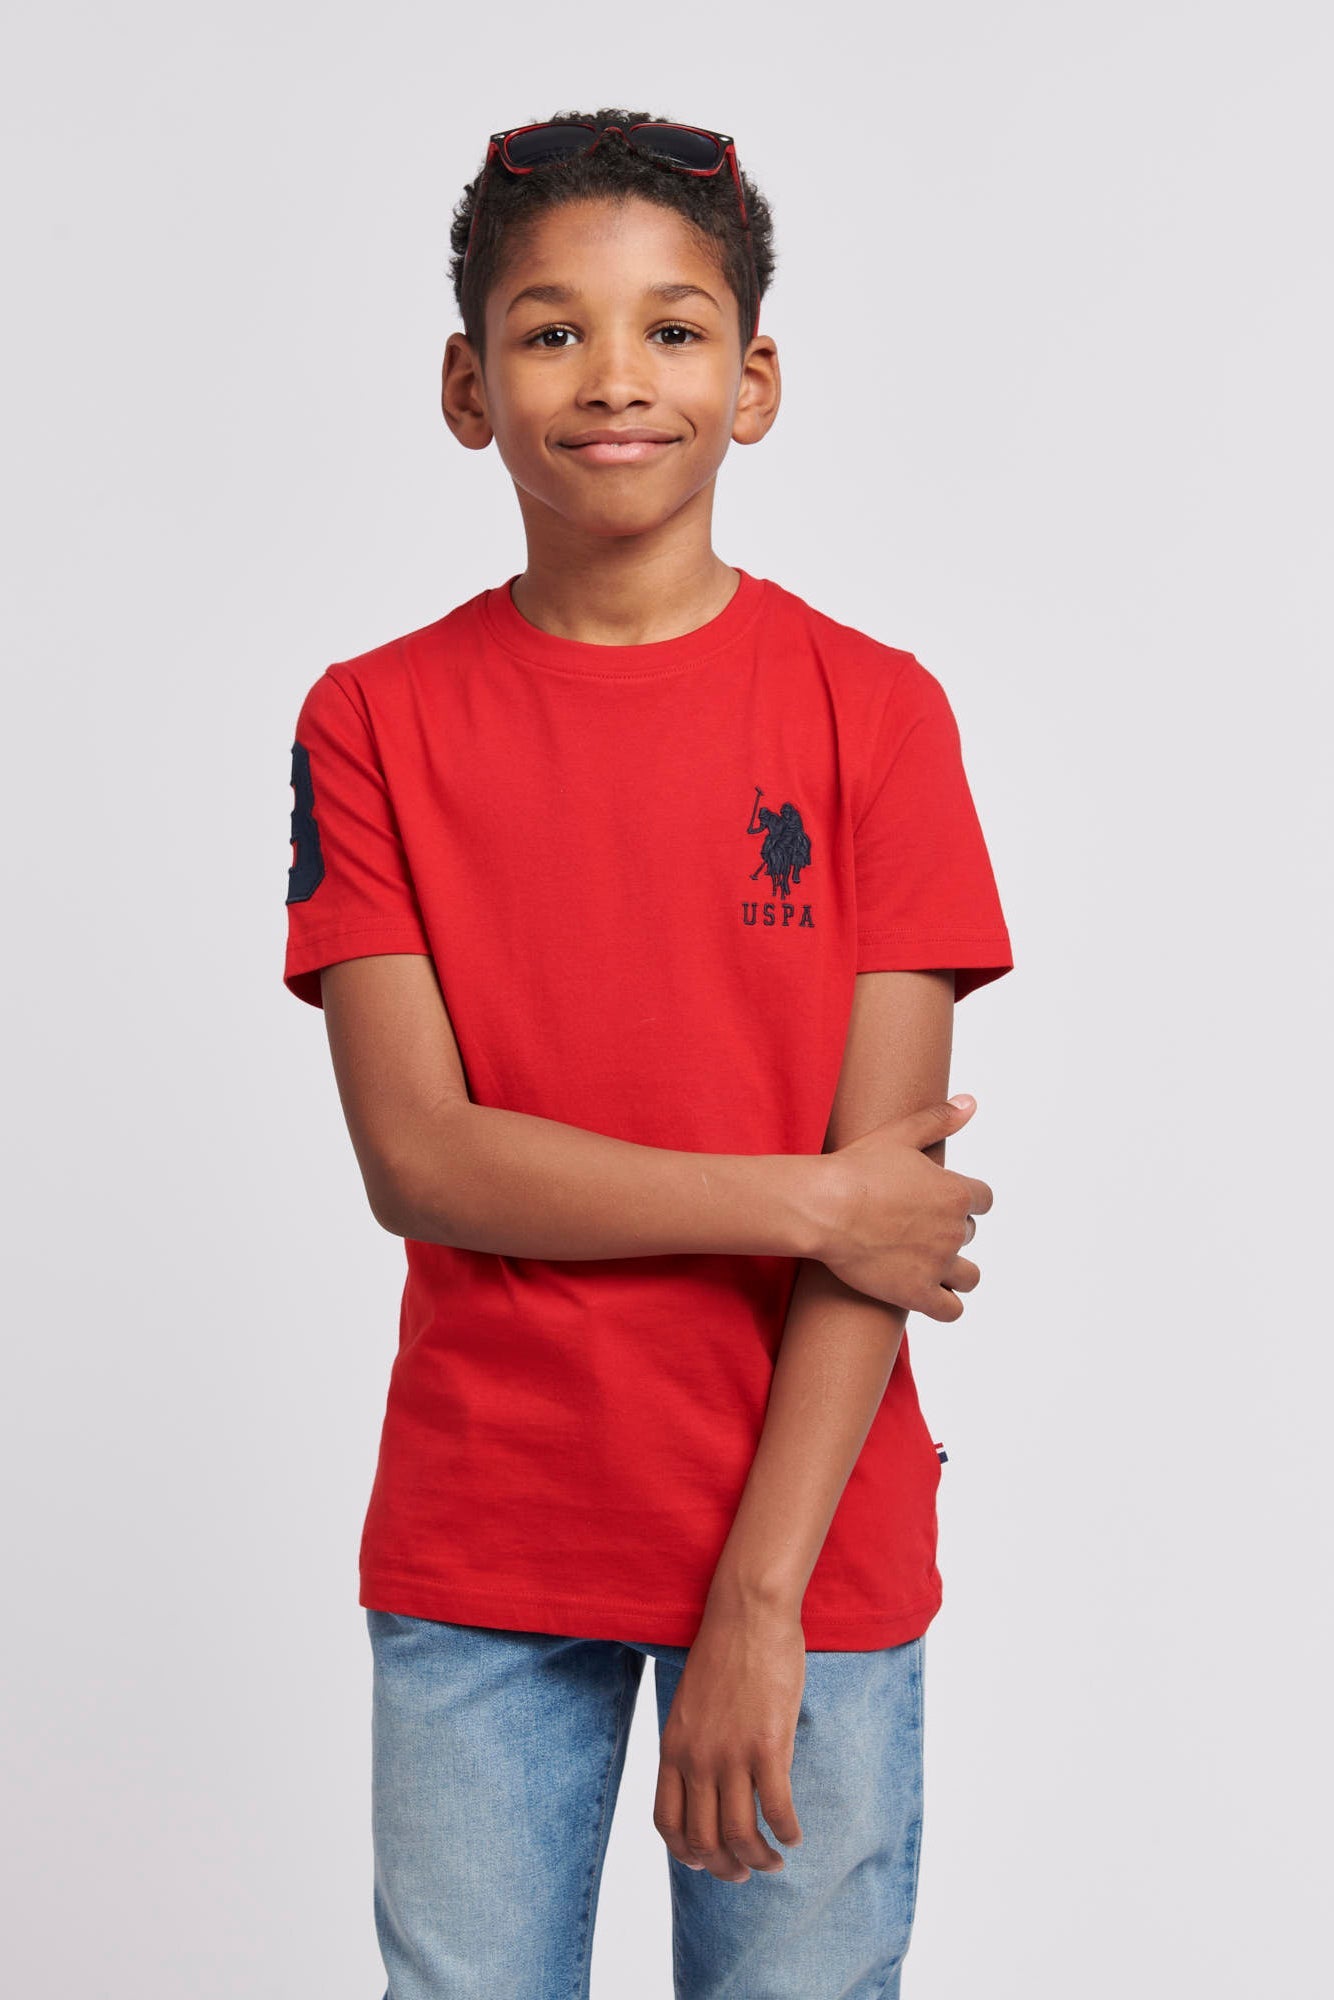 U.S. Polo Assn. Boys Player 3 T-Shirt in Haute Red